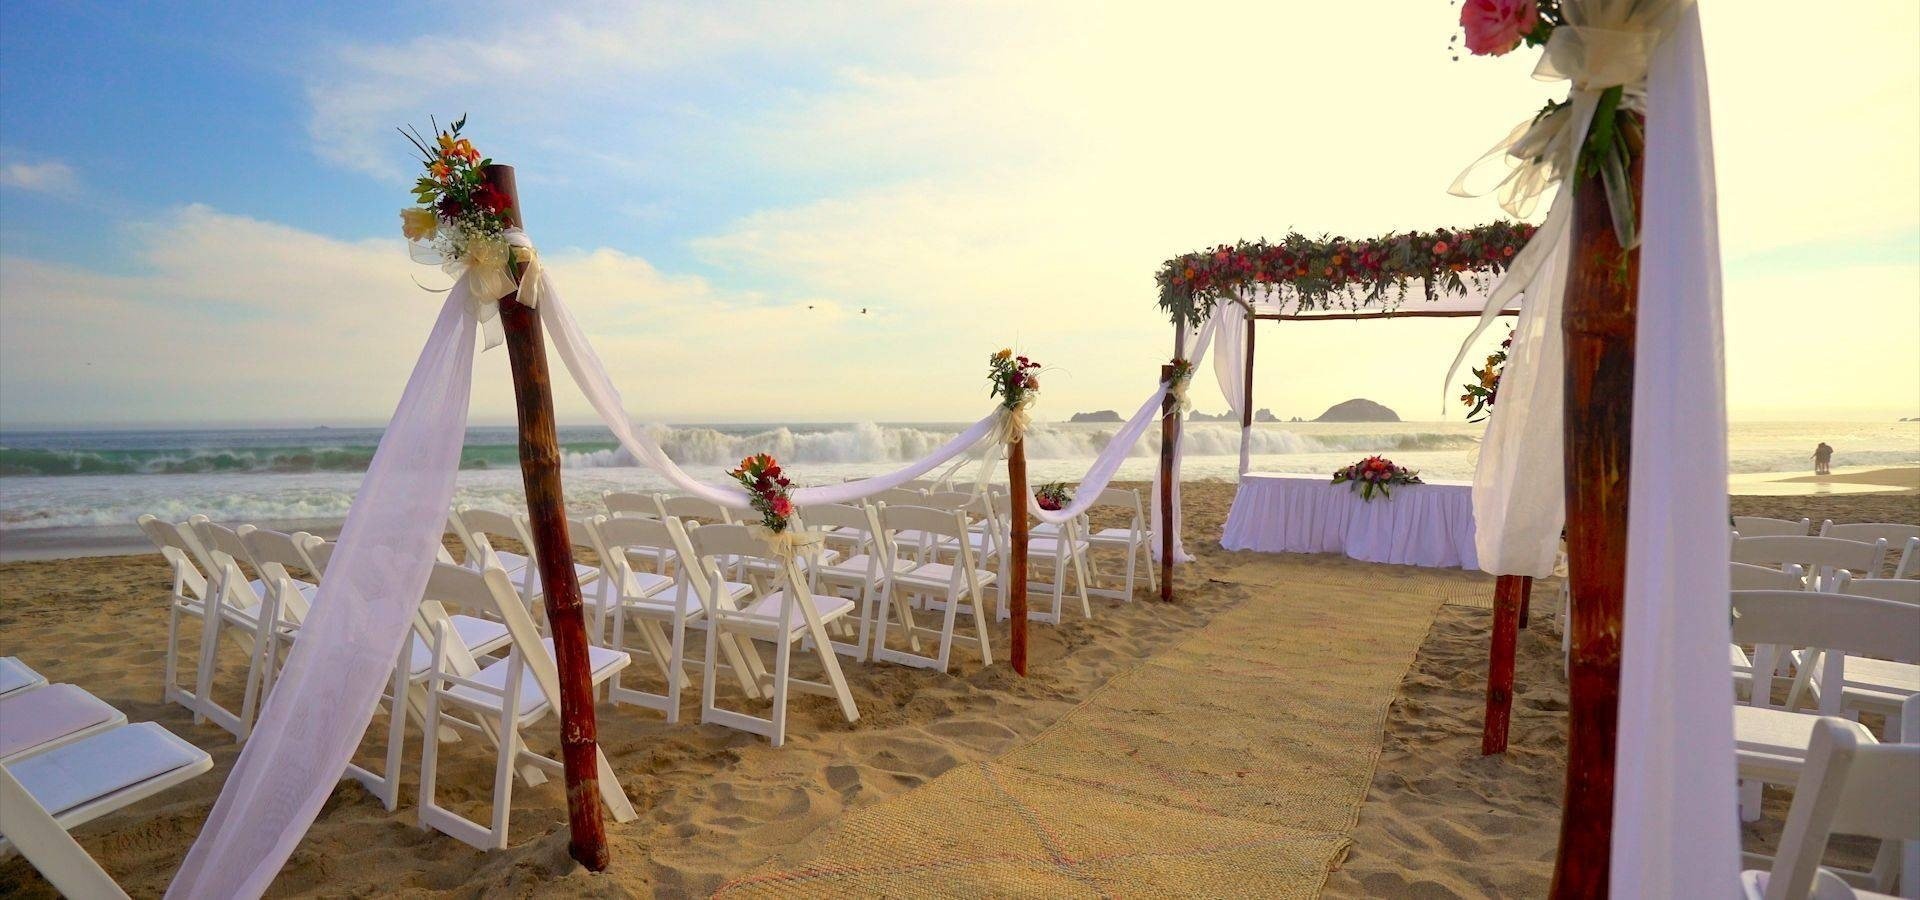 Altar decorated for weddings, get married on the beach with Park Royal Hotels and Resorts